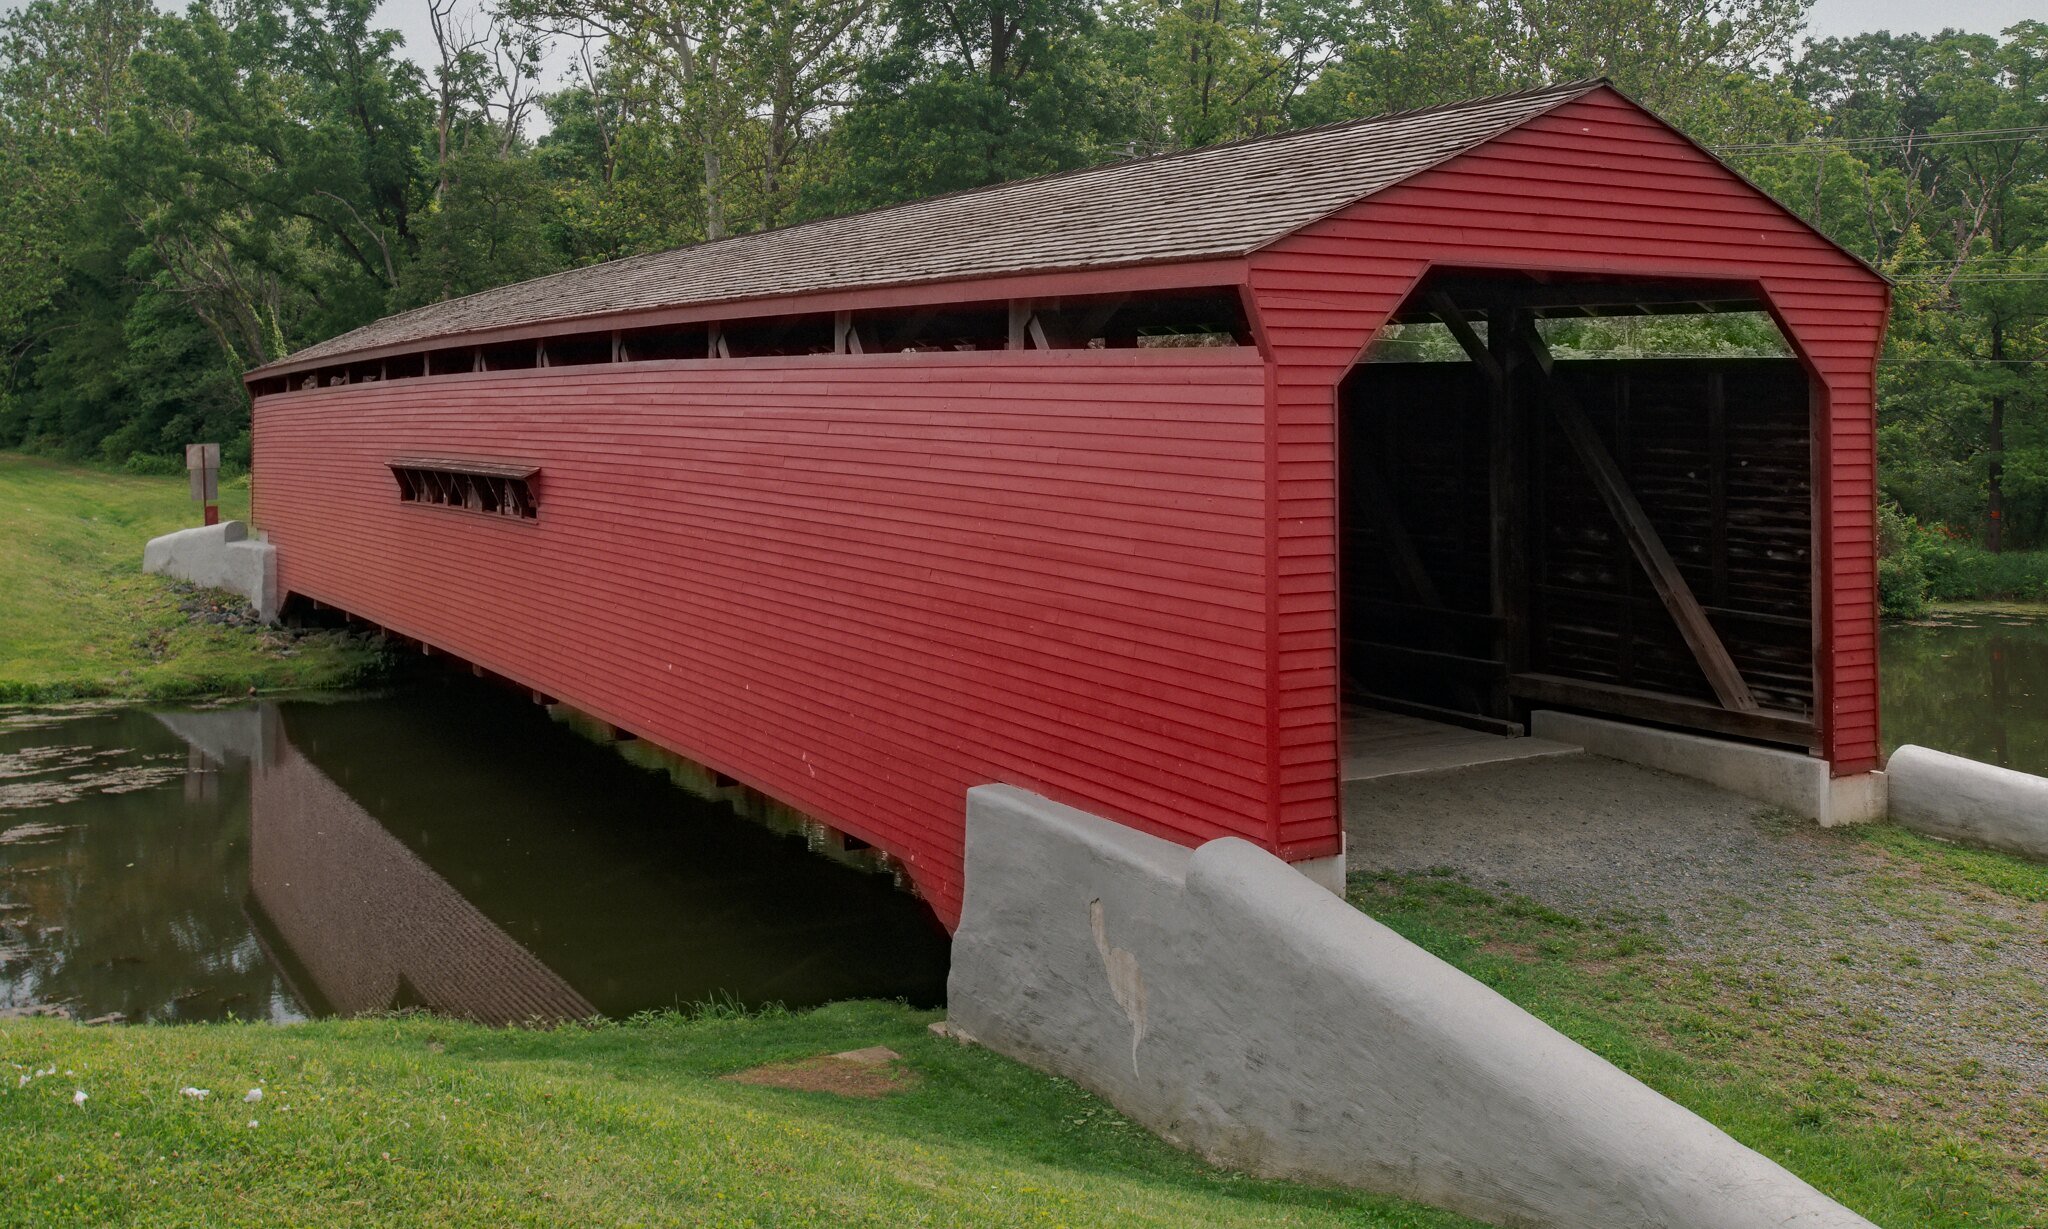  Gilpin Falls Covered Bridge in North East, Cecil County, MD.  Built in 1860. 